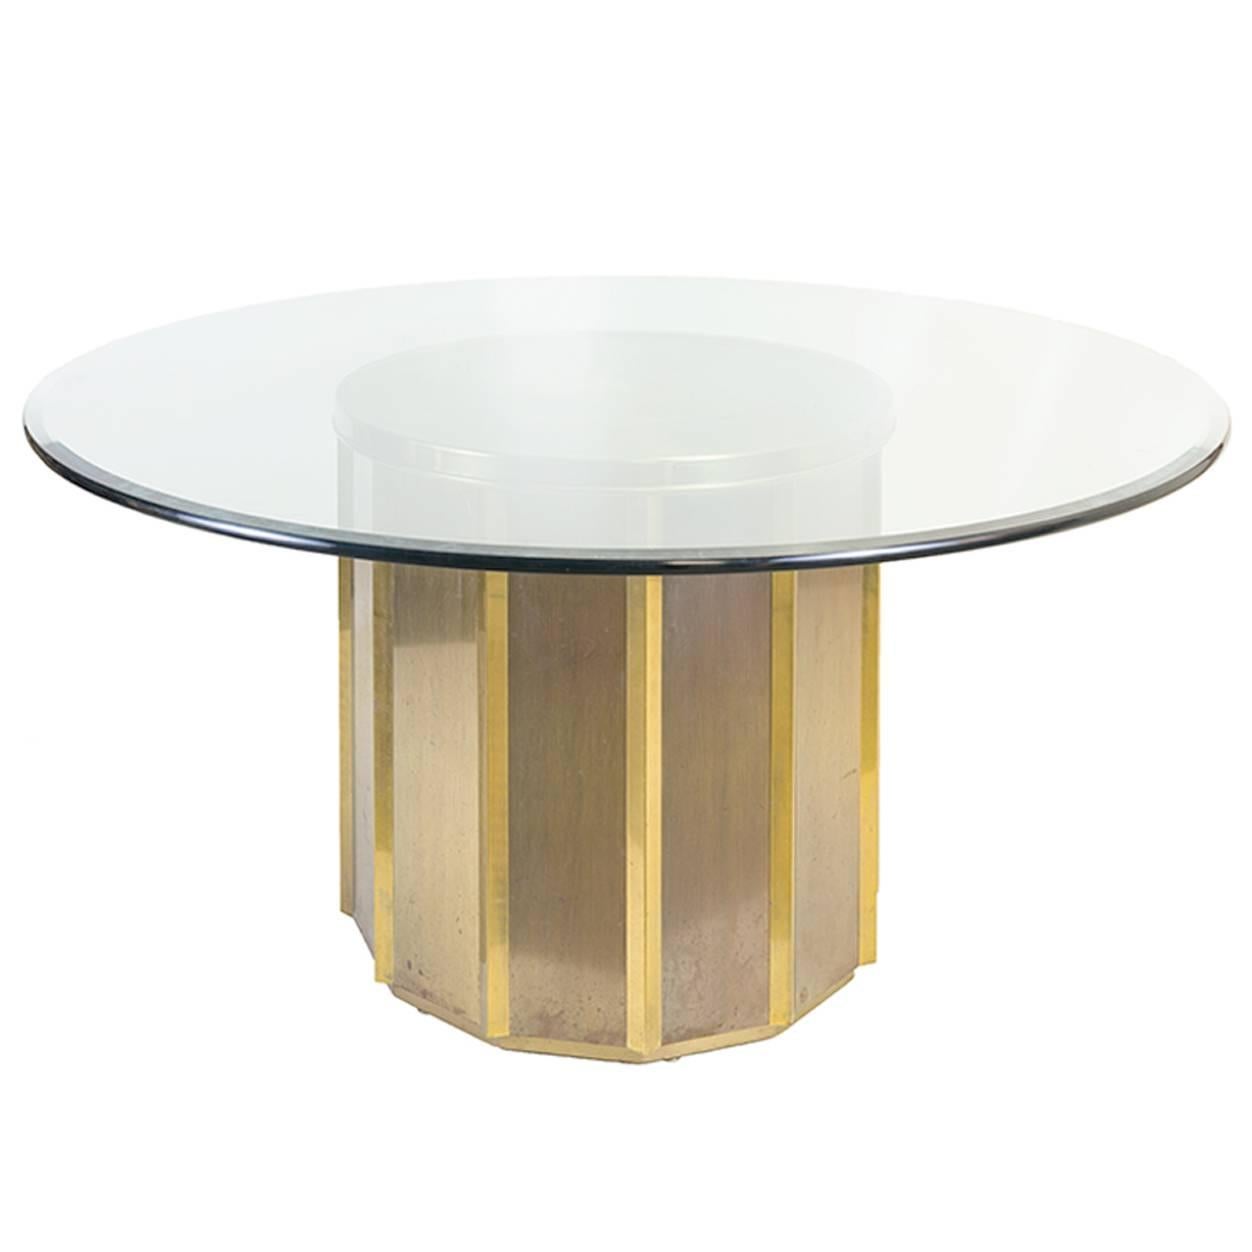 Round Brass Barrel Mastercraft Dining Table Base with Round Glass